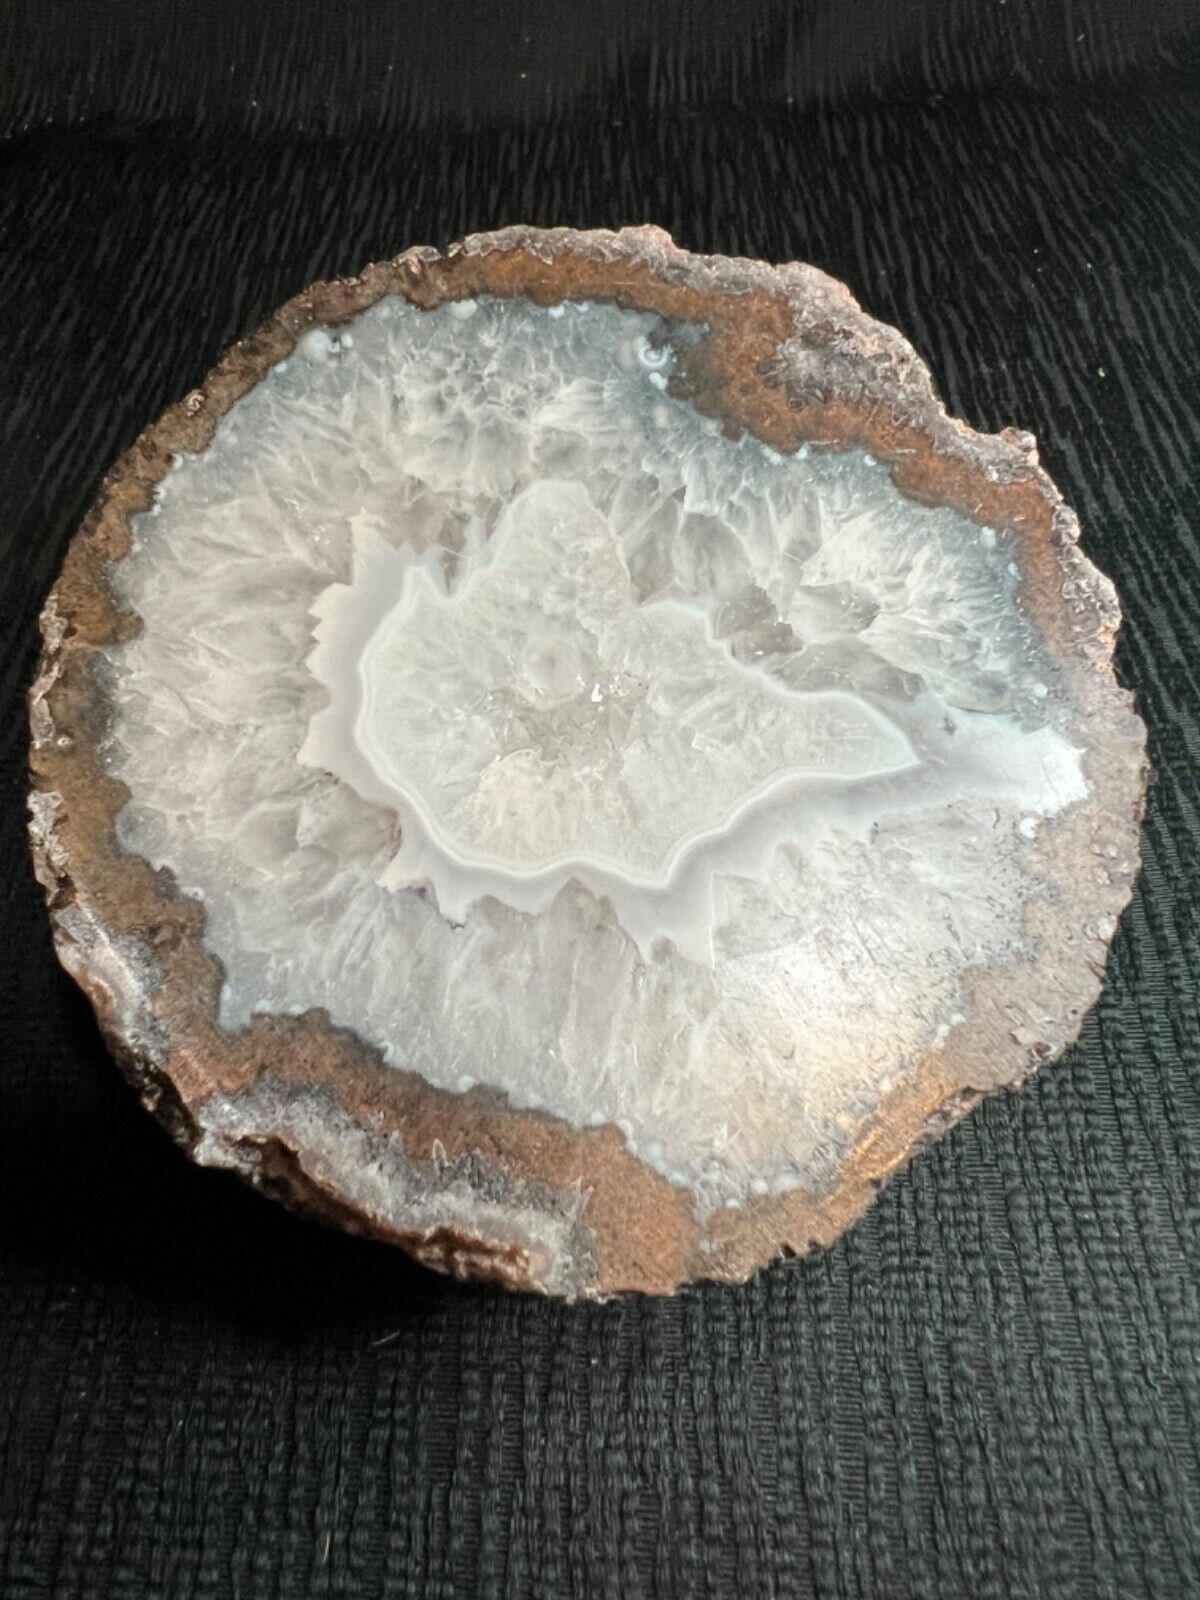 Authentic Vintage Arizona Large White Agate Geode Specimen 799+/- grams approx2#